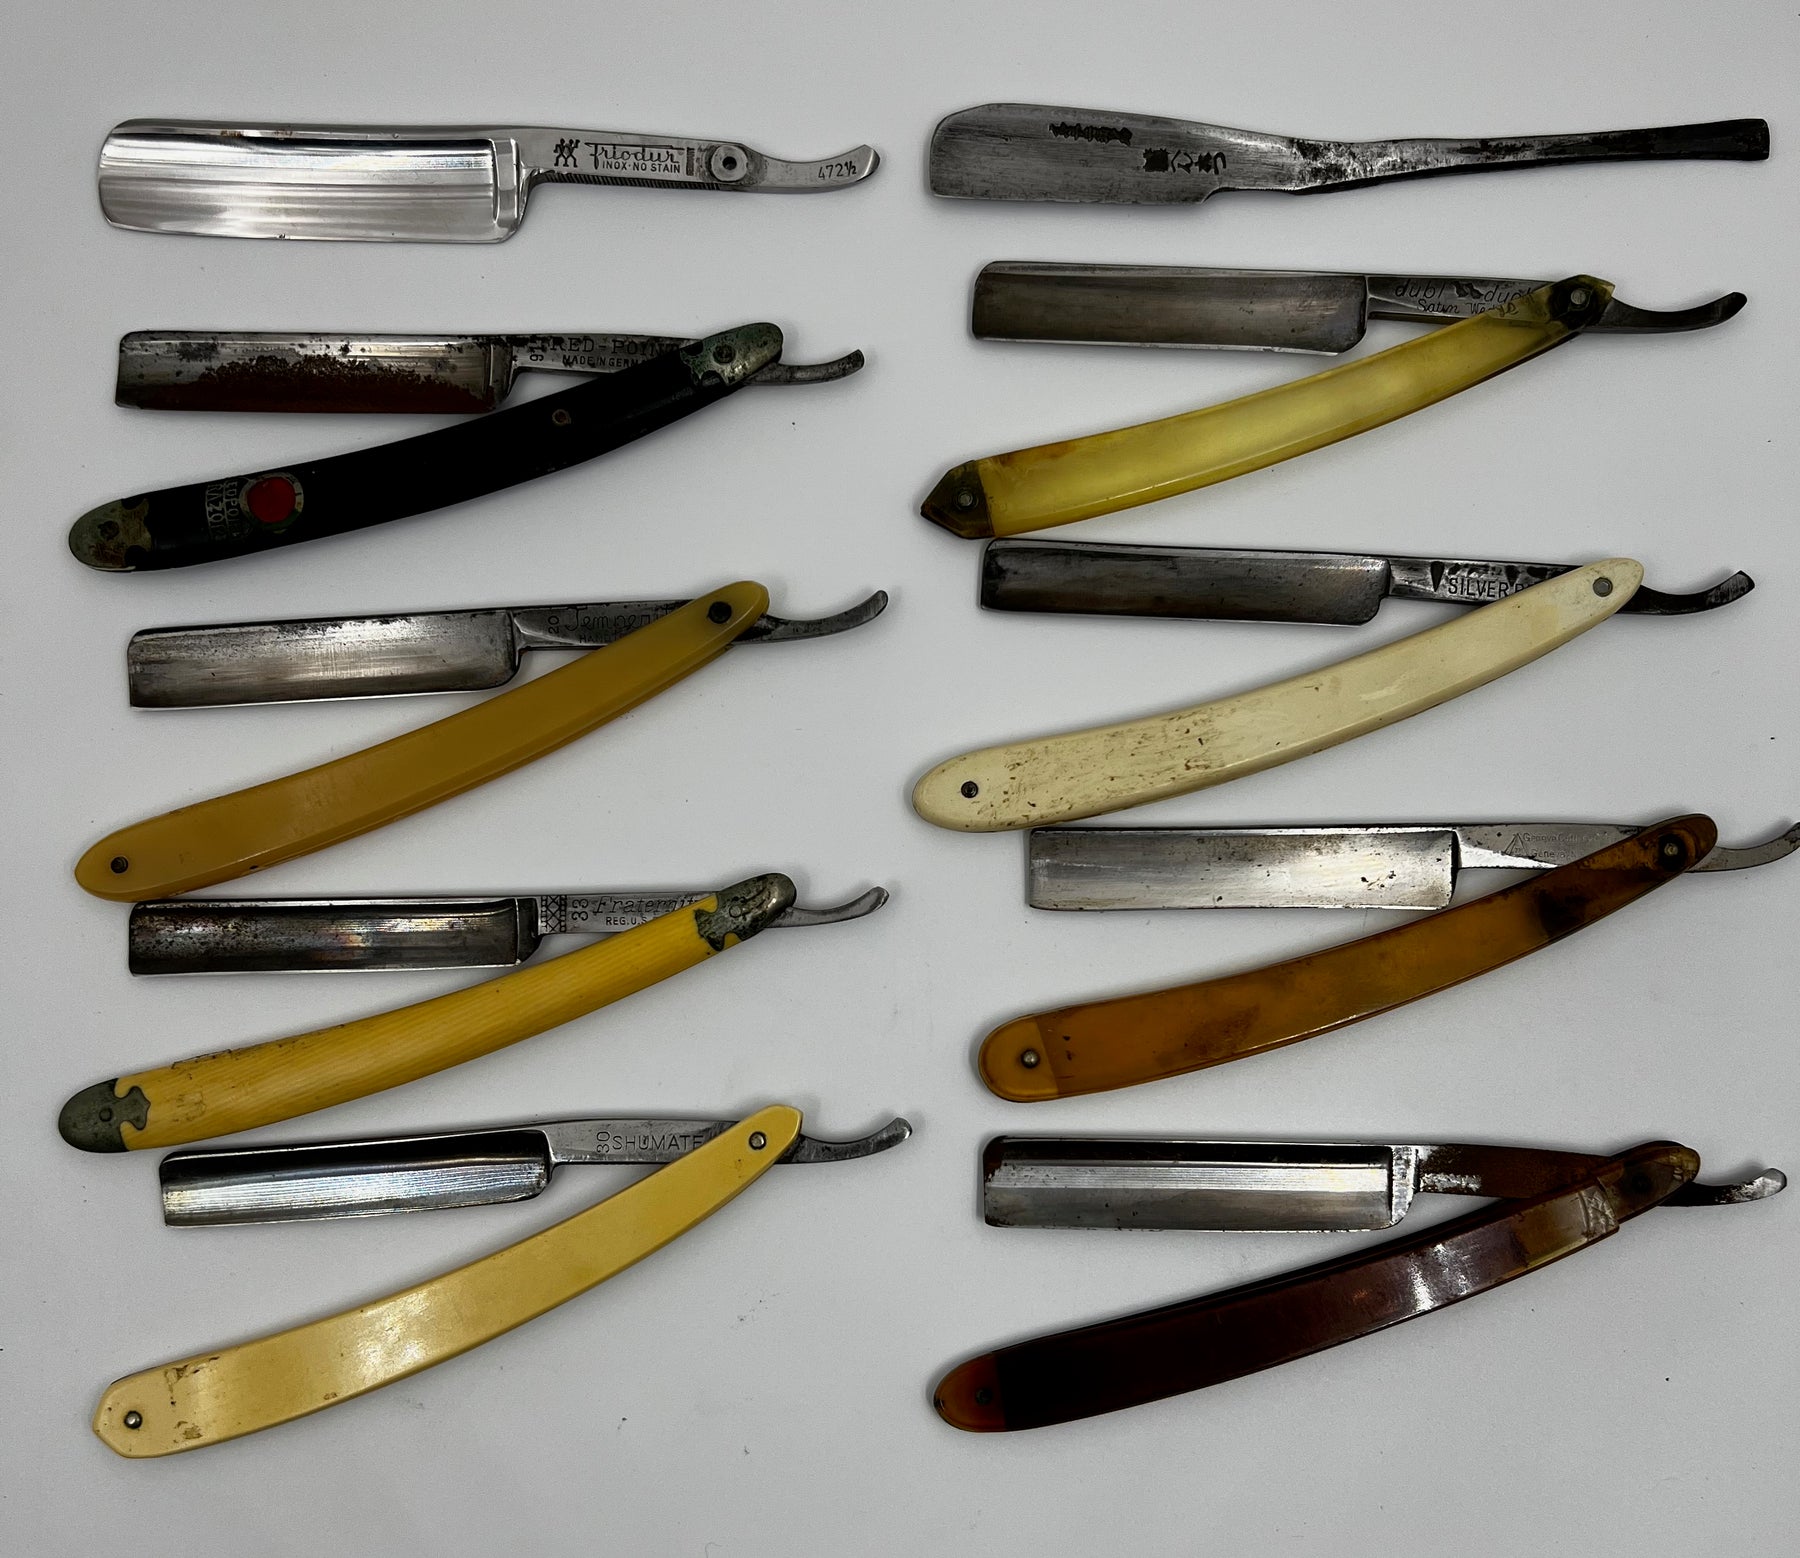 Vintage 10 Straight Razor Lot #7 - May Contain Sheffield, Solingen, Japanese & USA makers, as pictured